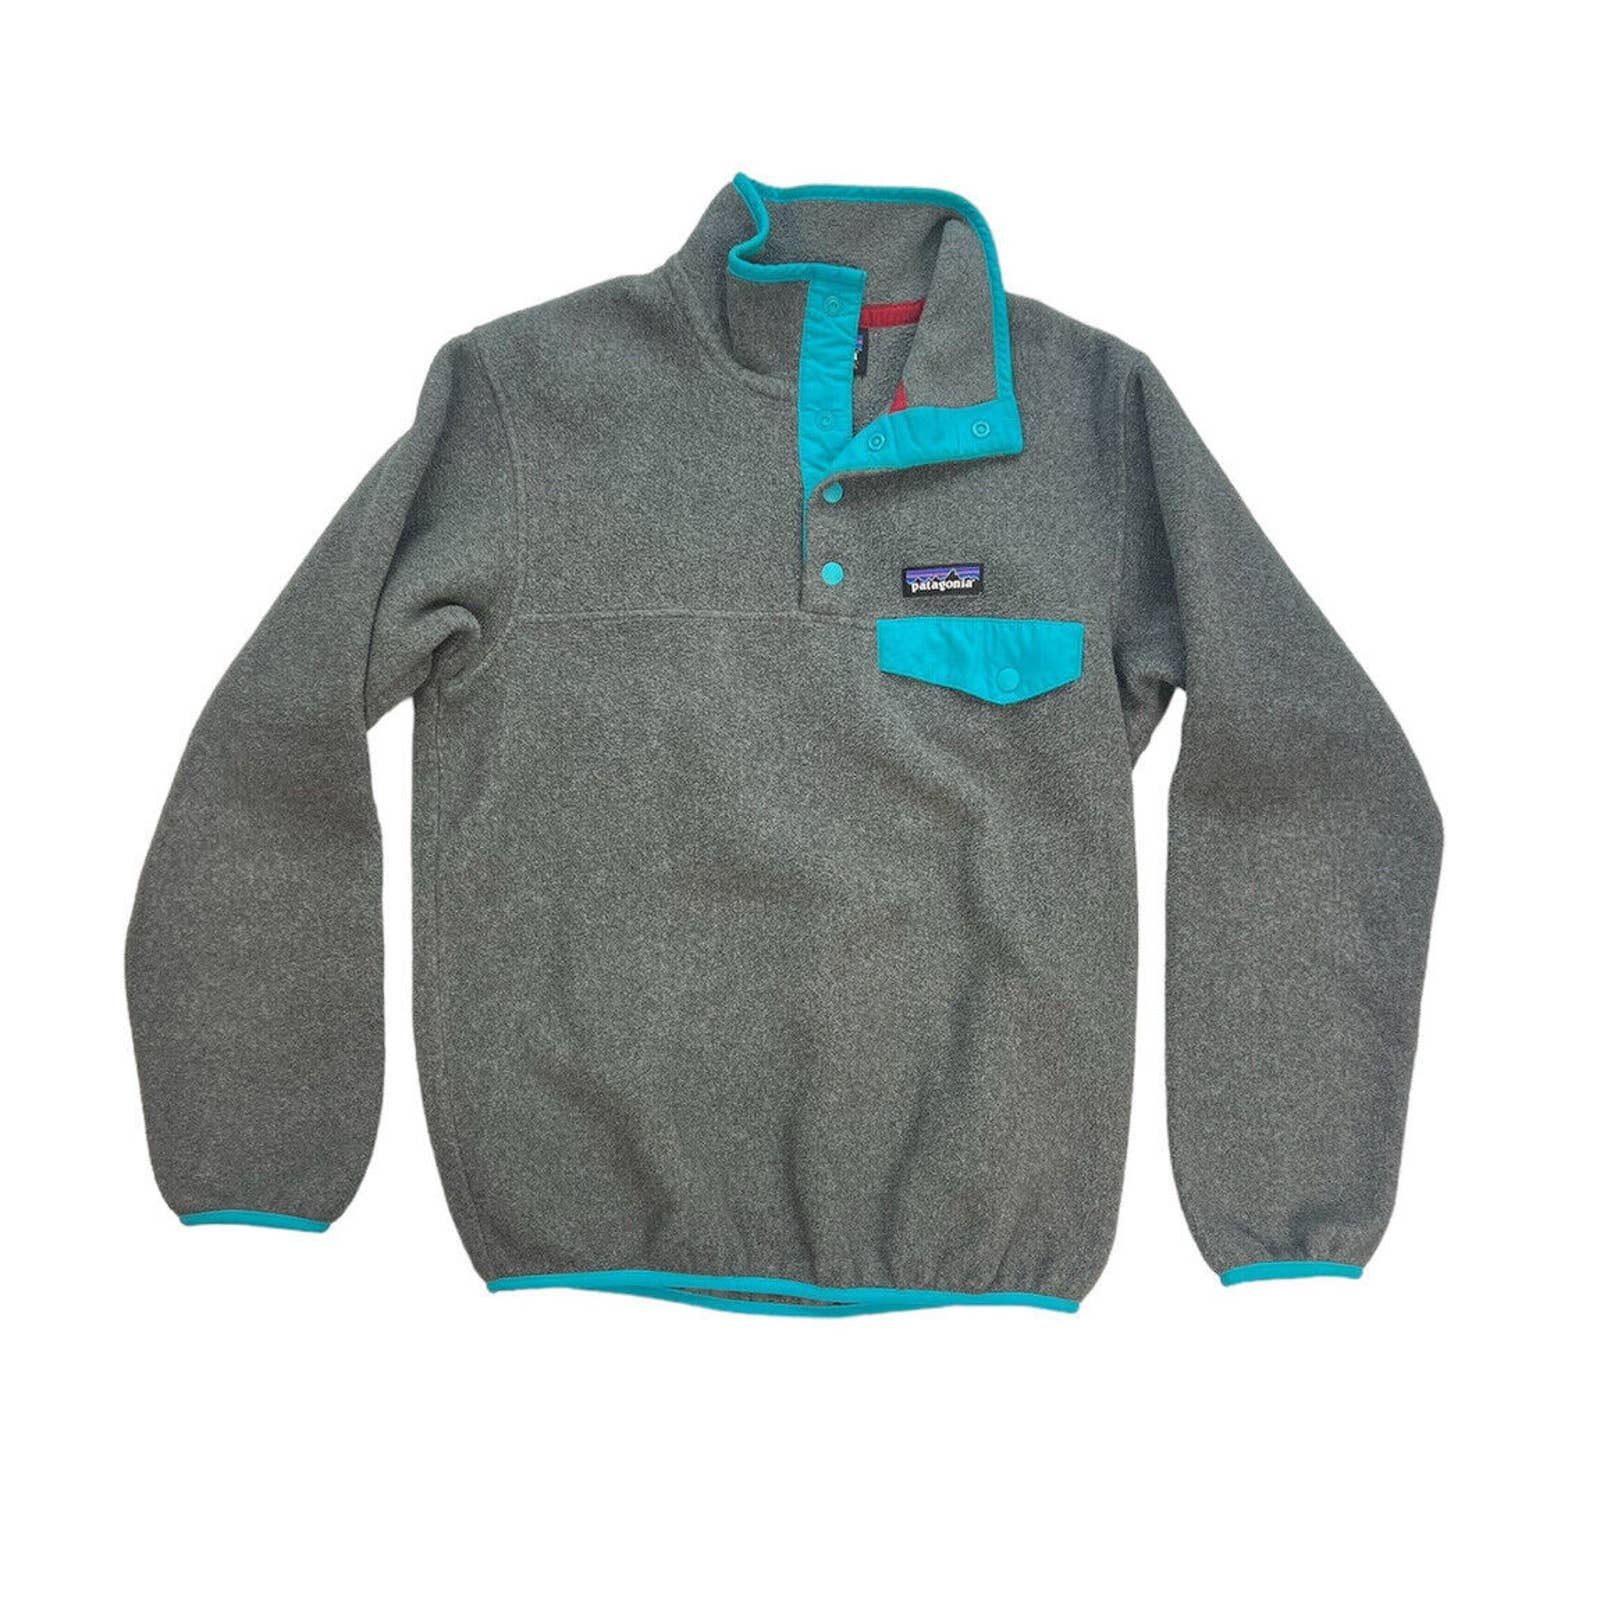 Patagonia Synchilla Snap-T Pullover Womens XS Gray And Blue Sweatshirt Fleece